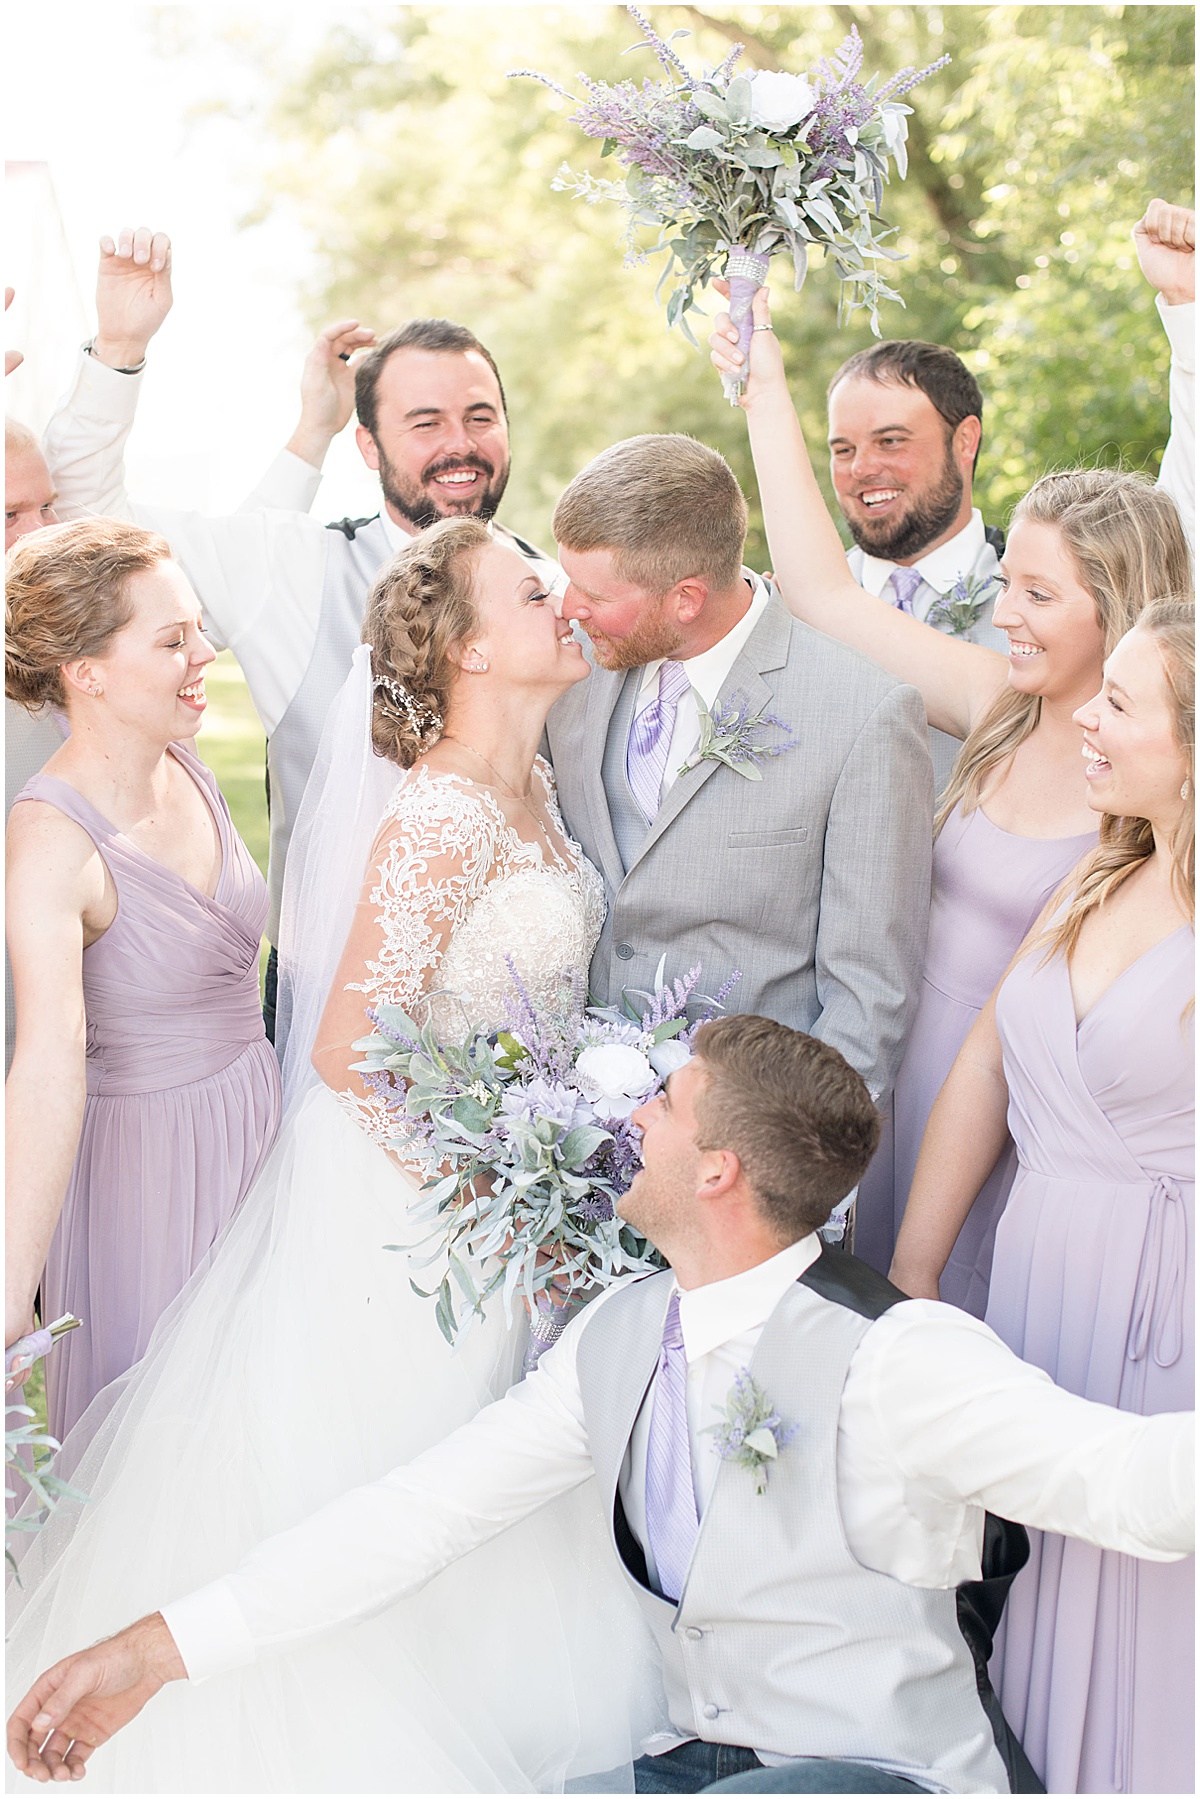 Bridal party excited for wedding at the Wagner Angus Barn in Wolcott, Indiana by Victoria Rayburn Photography